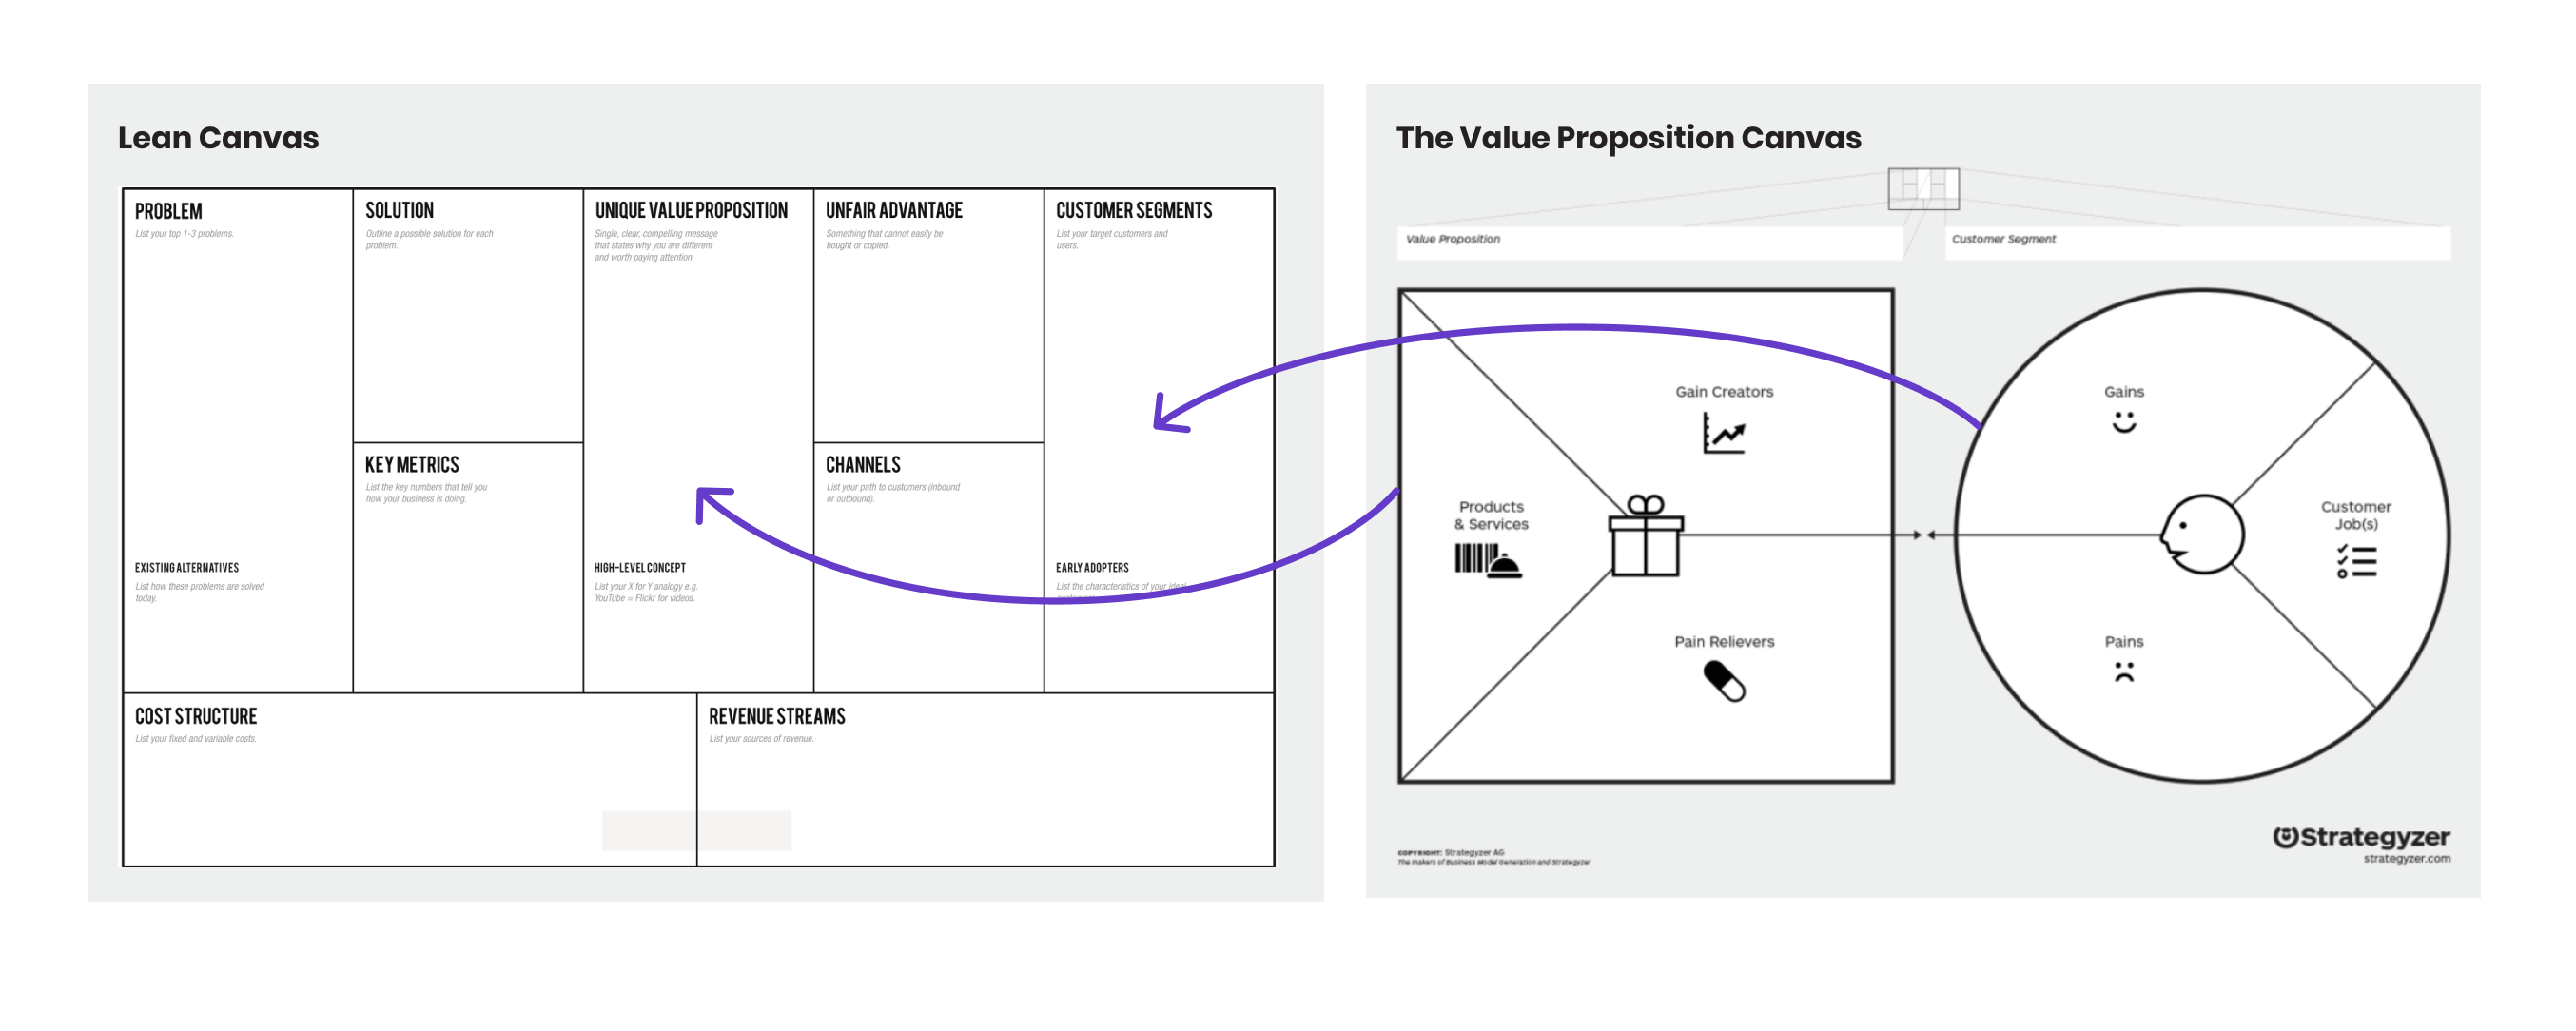 How the lean canvas and valueproposition canvas are related